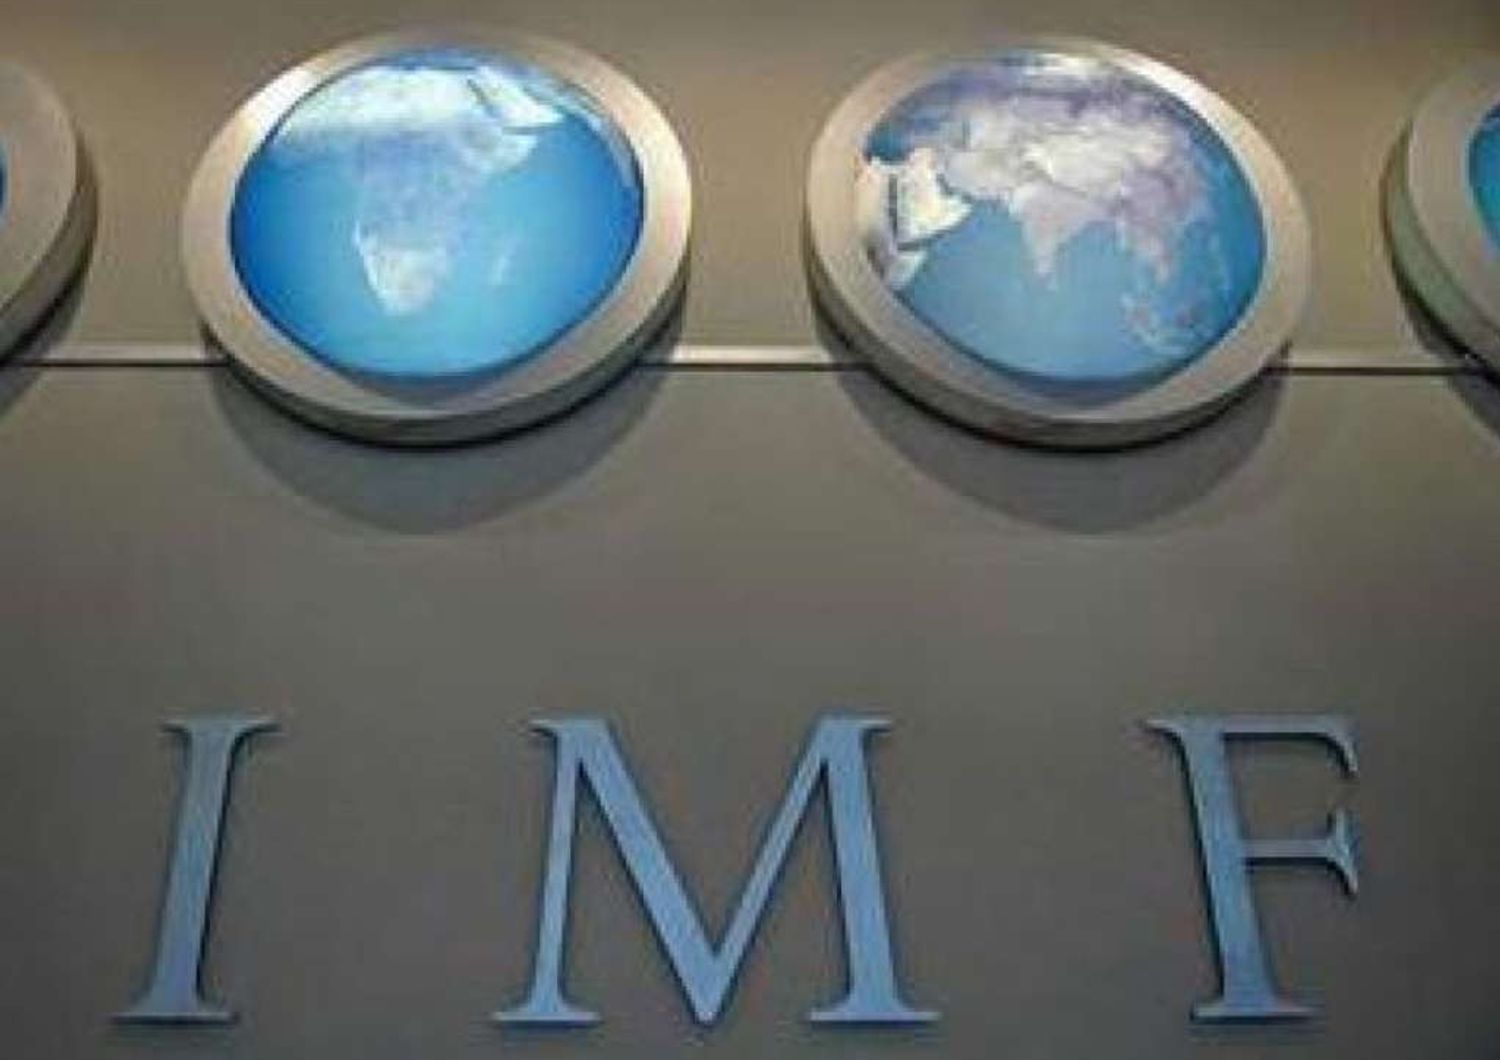 Italy must fight unemployment, says IMF